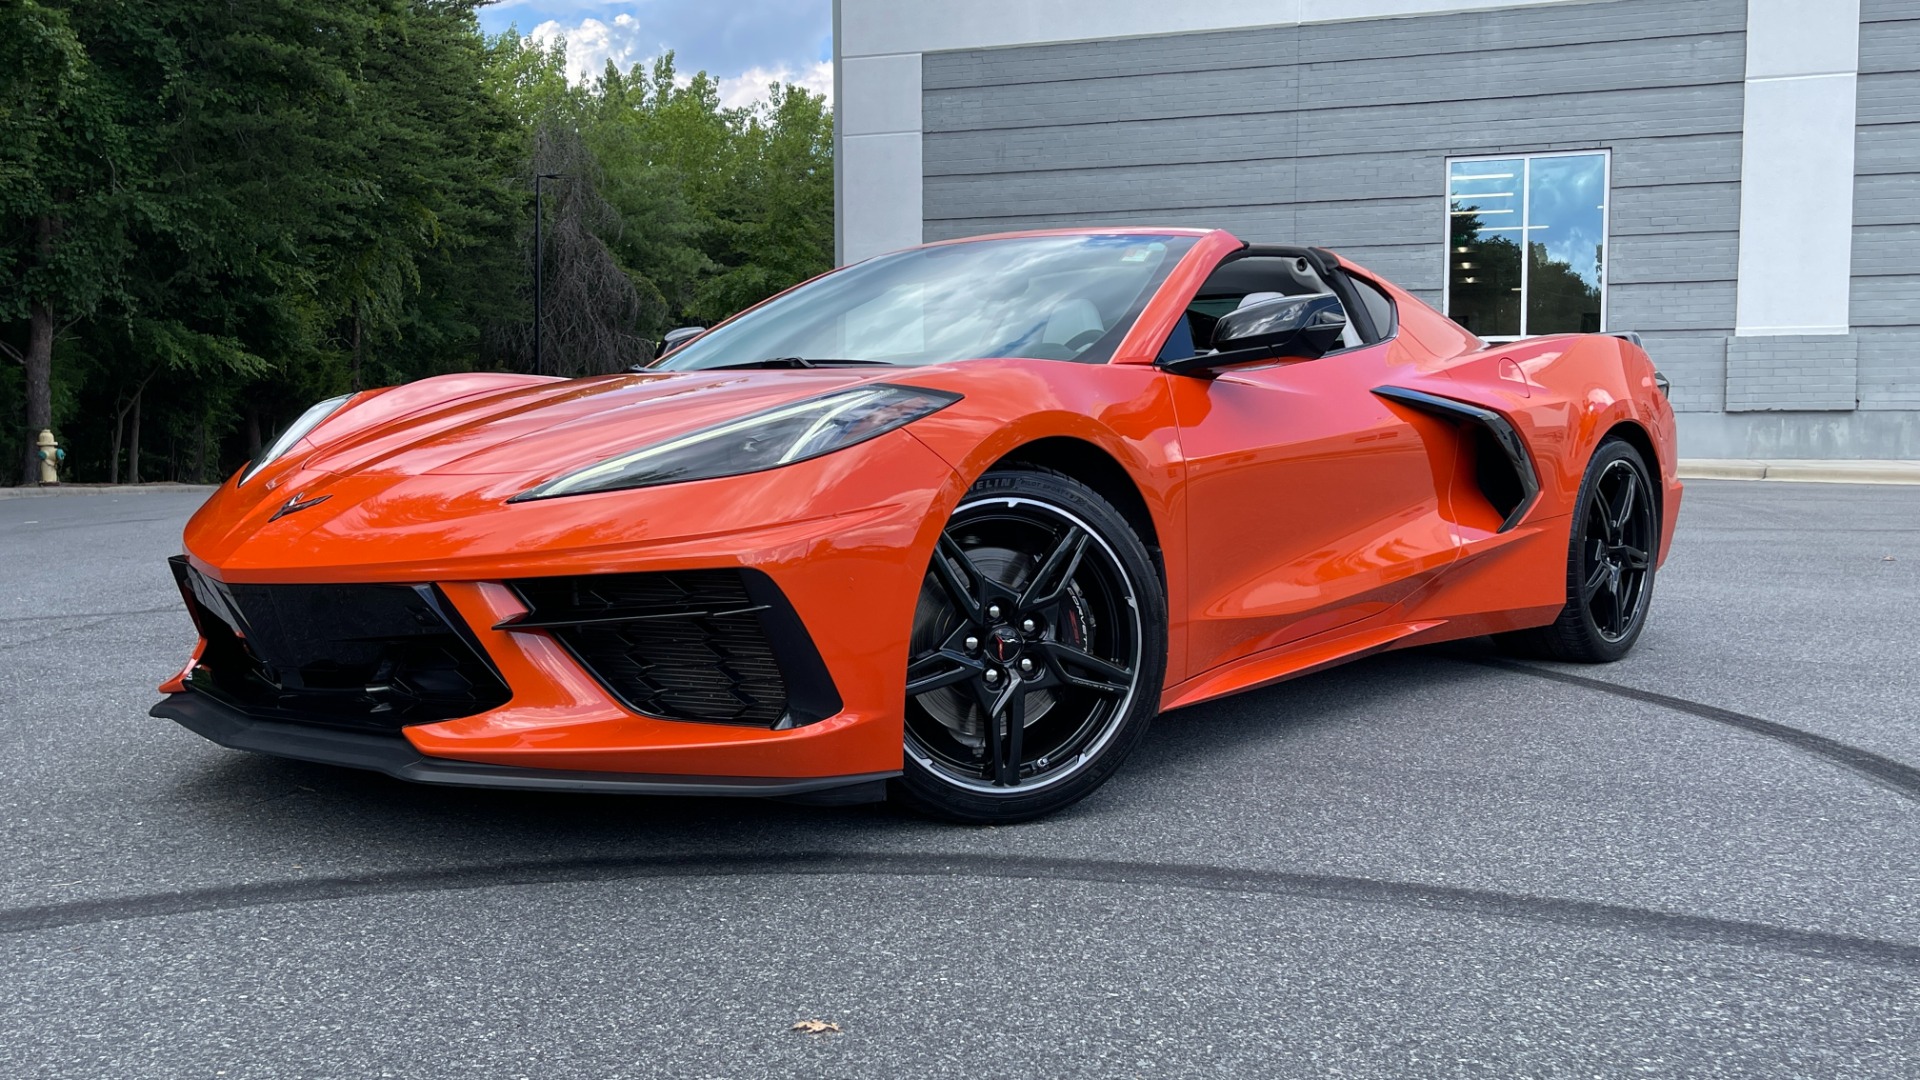 Used 2020 Chevrolet Corvette 3LT / Z51 / PERFORMANCE EXHAUST / FRONT LIFT / Z51 BRAKES / CARBON FIBER AC for sale $92,595 at Formula Imports in Charlotte NC 28227 16